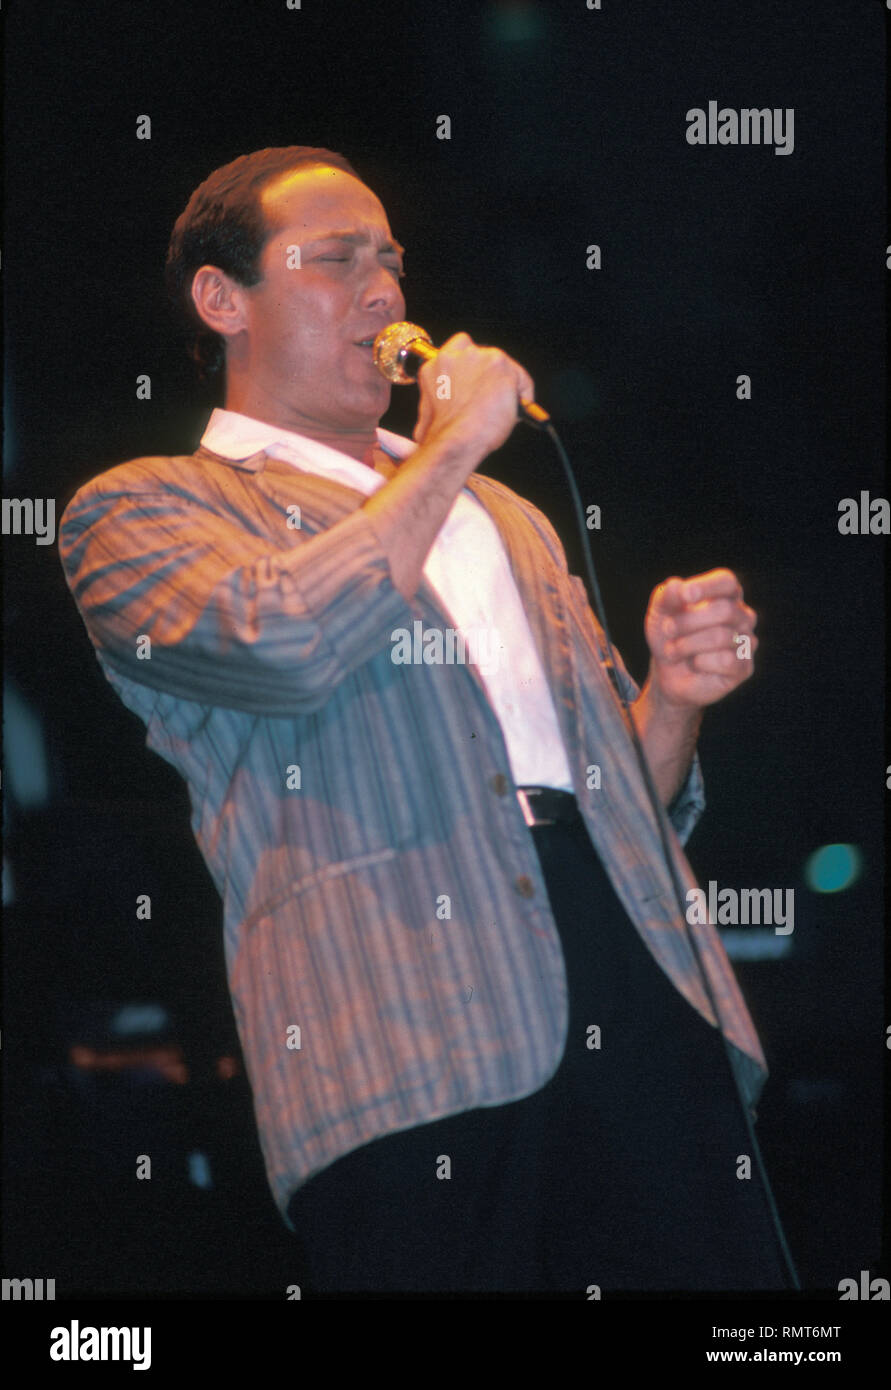 Singer Paul Anka is shown performing 'live' in concert. Stock Photo